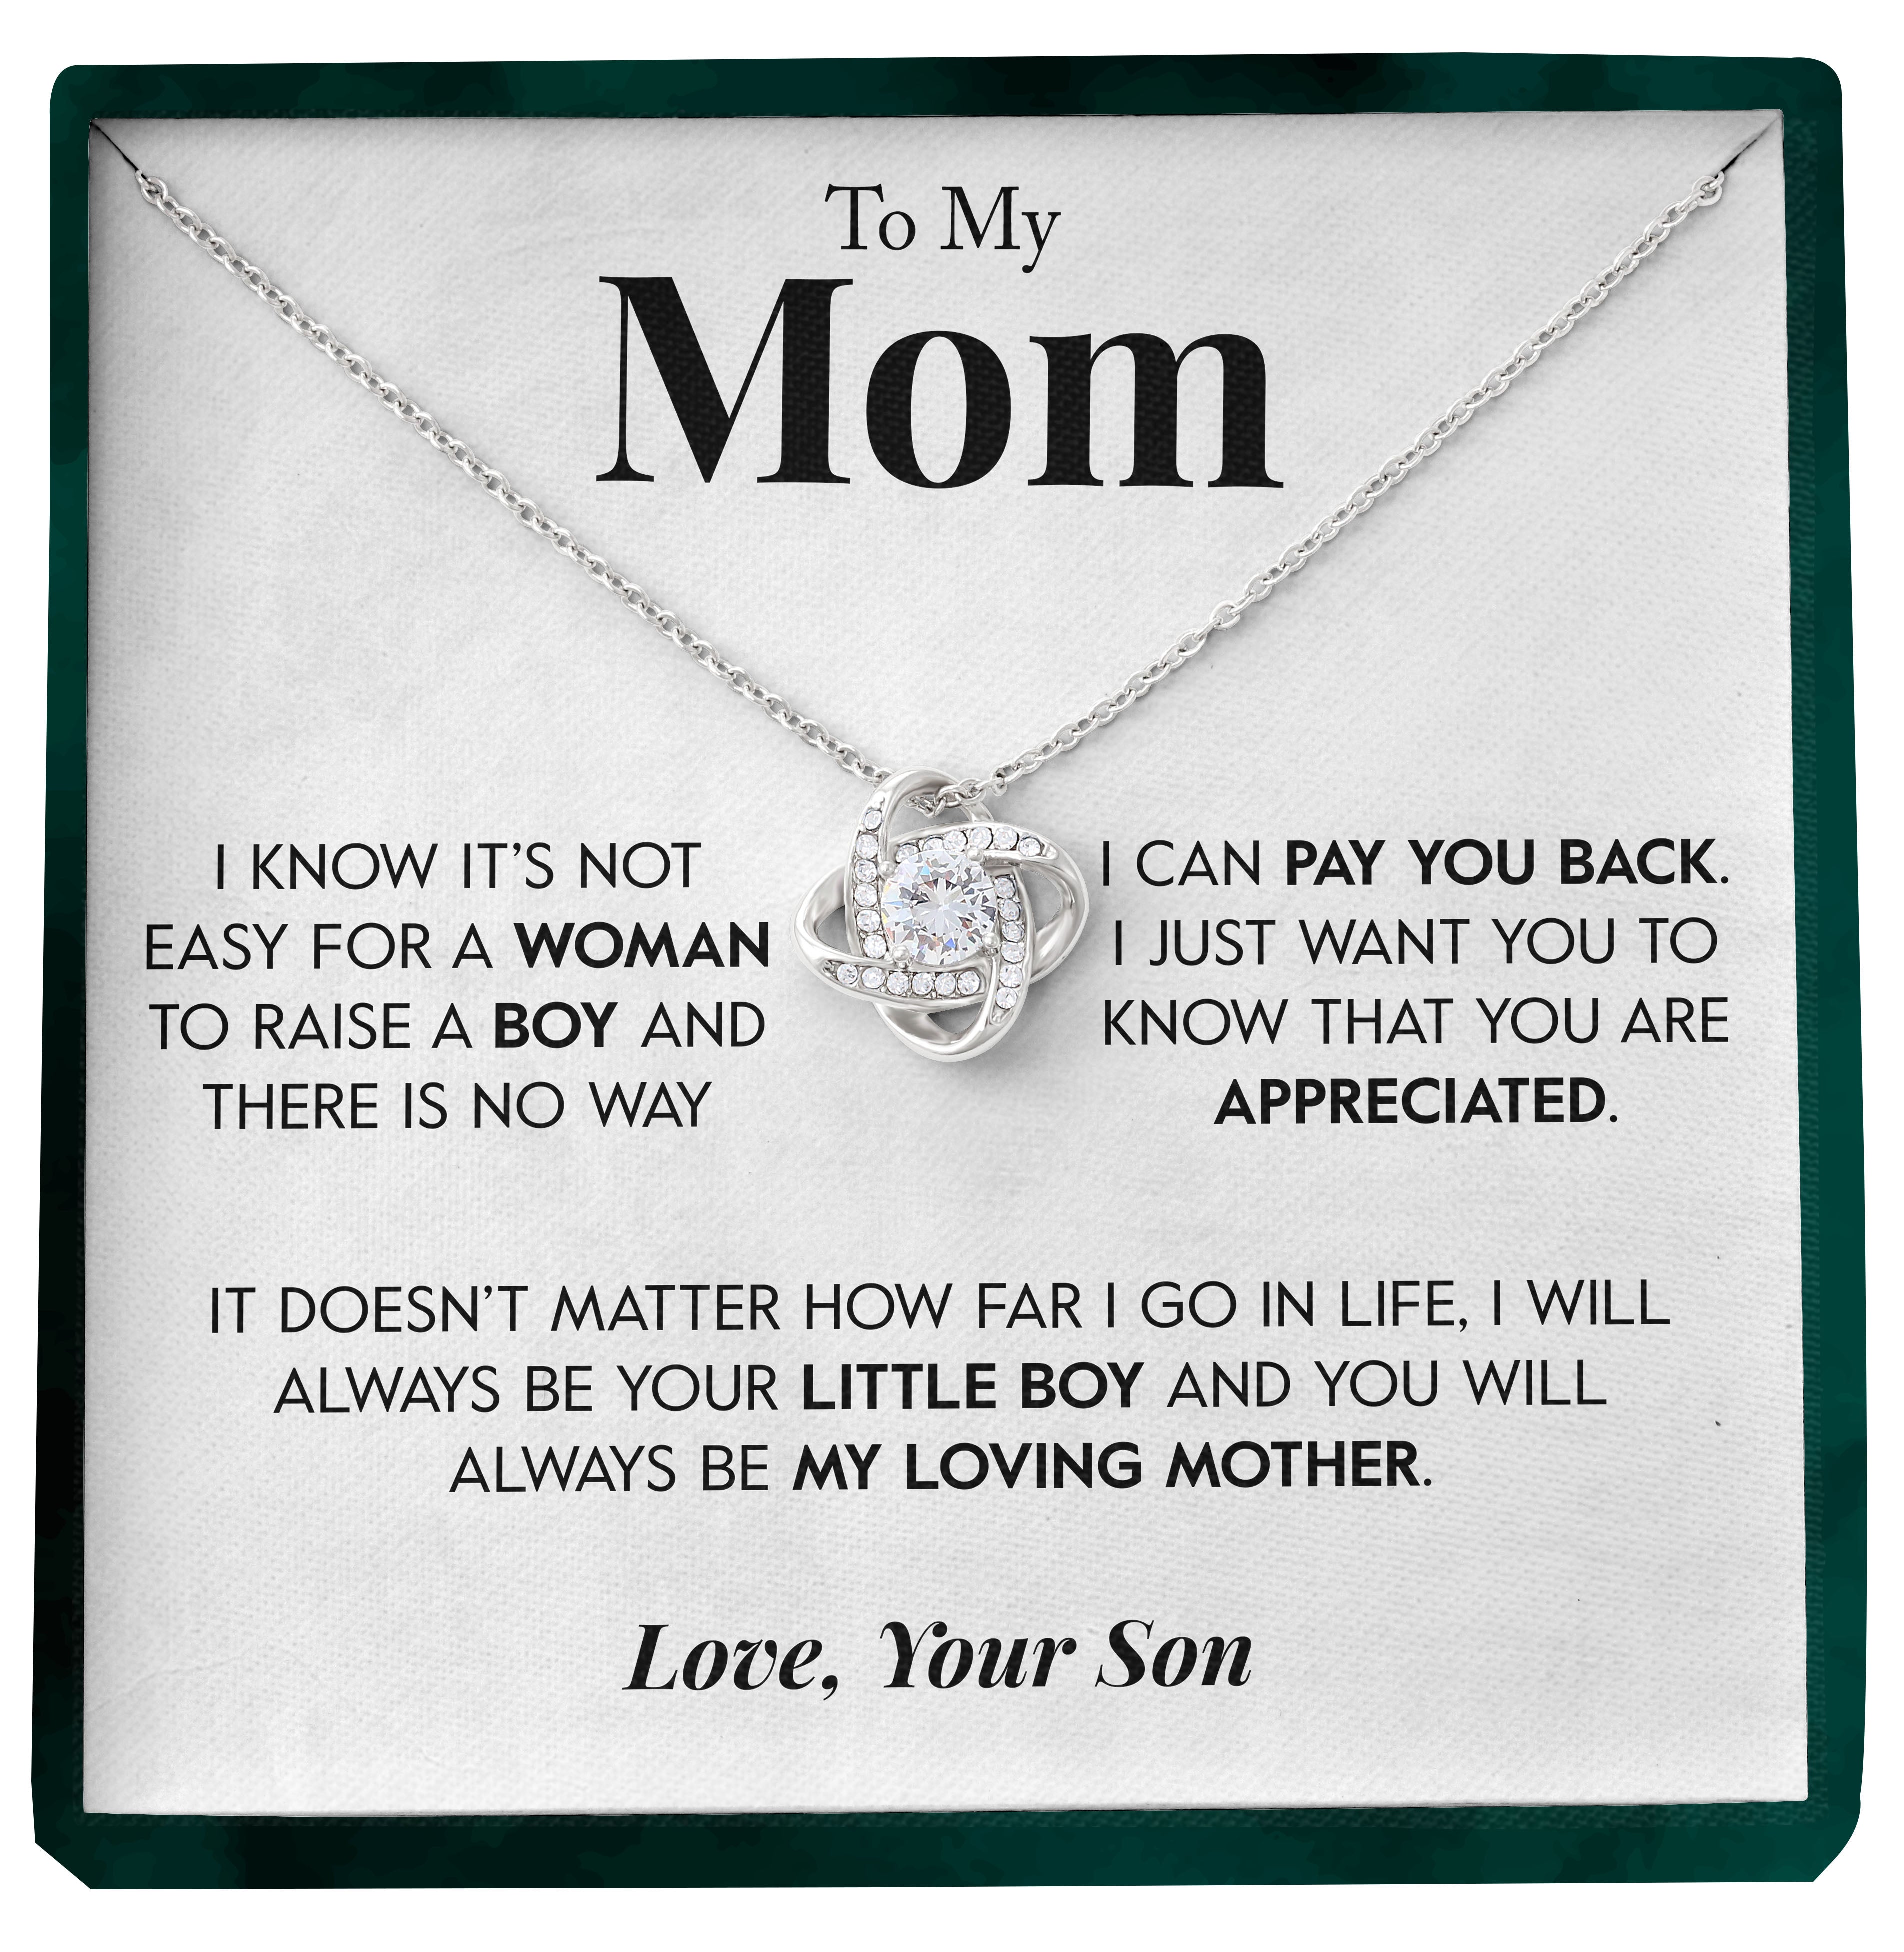 To My Mom | "Pay You Back" | Love Knot Necklace